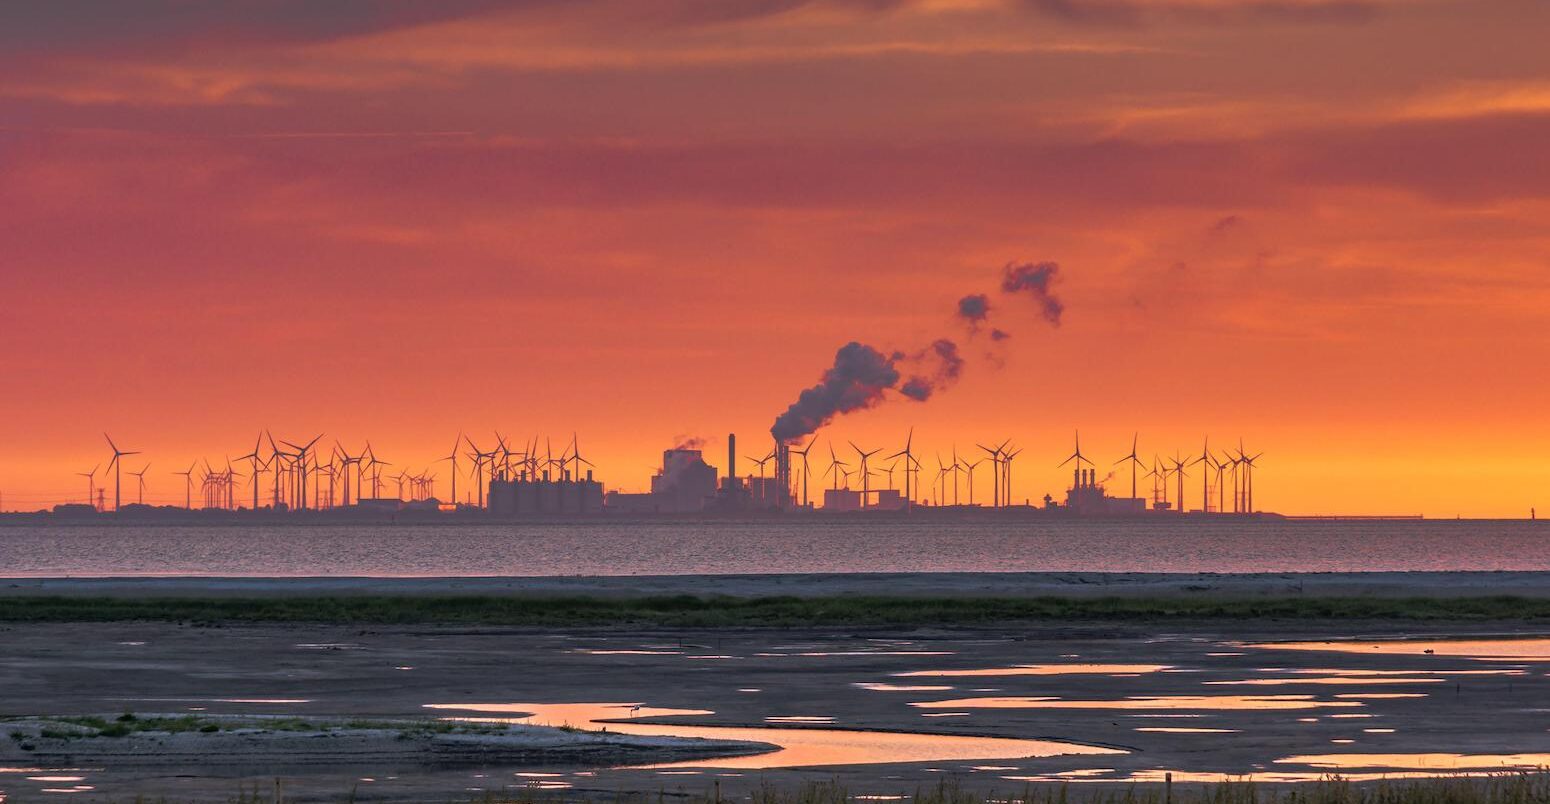 The Wadden Sea, factory buildings and wind turbines at sunset, Eemshaven, Netherlands.